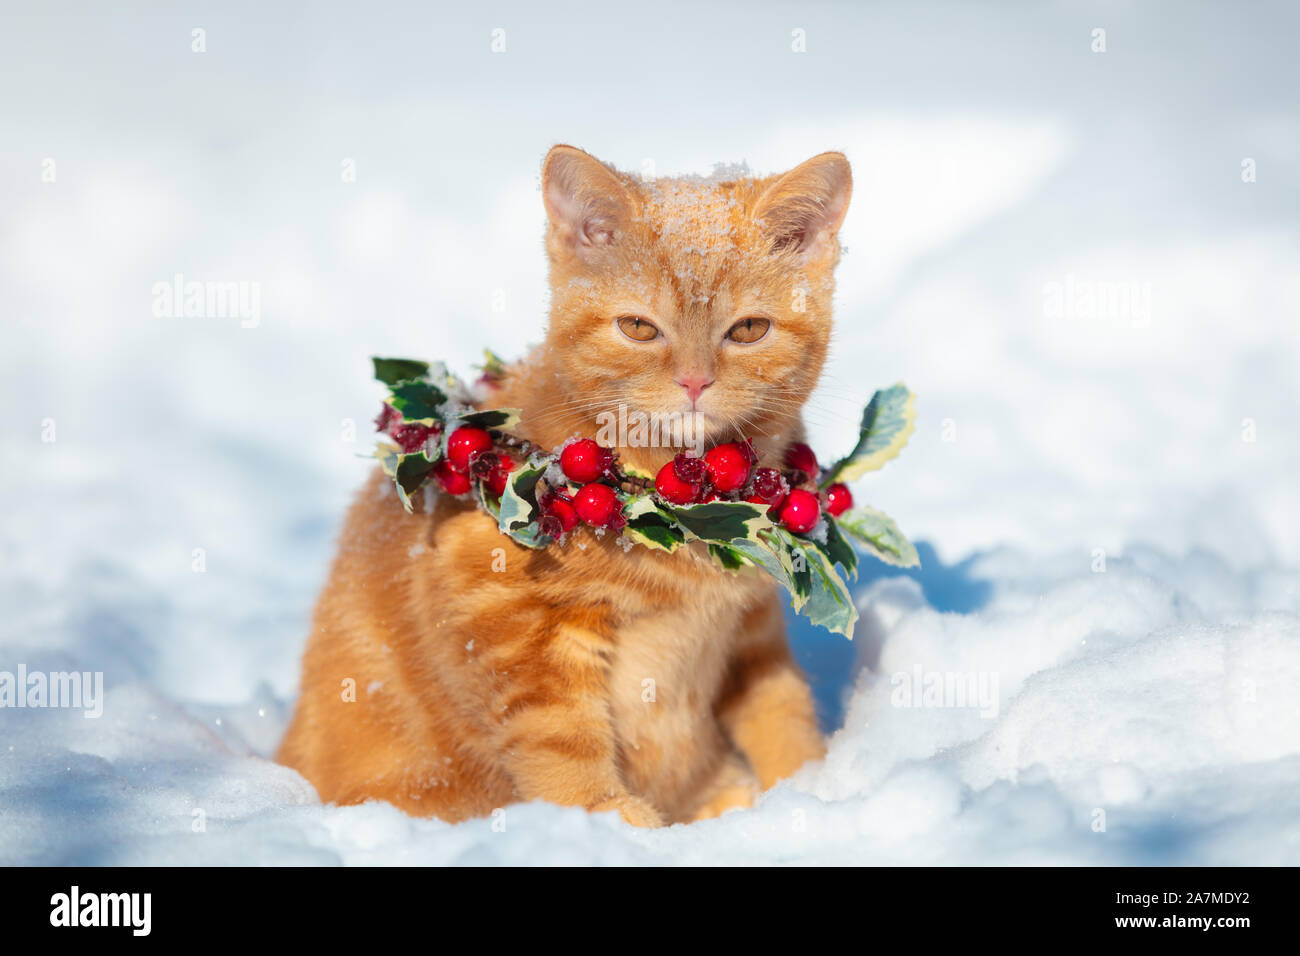 Little red kitten in a Christmas wreath sits on snow in the winter Stock Photo